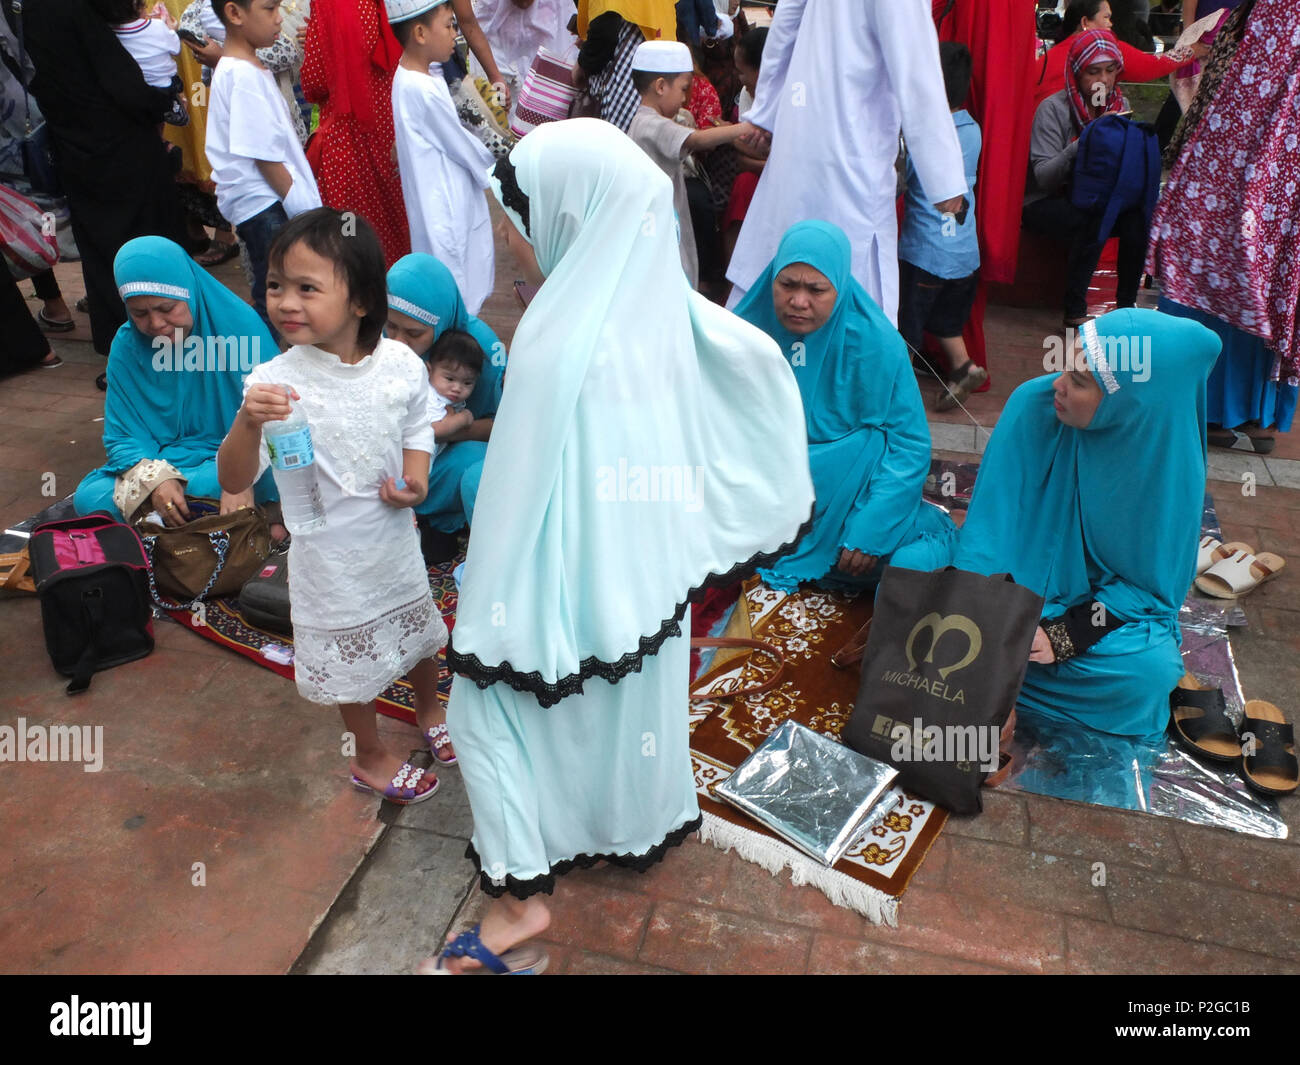 Muslim women with their daughters having a picnic after their morning prayers. Filipino and foreign Muslims gather at Quirino Grandstand in Manila to celebrate the end of Ramadan. They celebrate it with prayers, food and fun, especially for the family. Eid al-Fitr is an important religious holiday celebrated by Muslims worldwide that marks the end of Ramadan, the Islamic holy month of fasting. Stock Photo